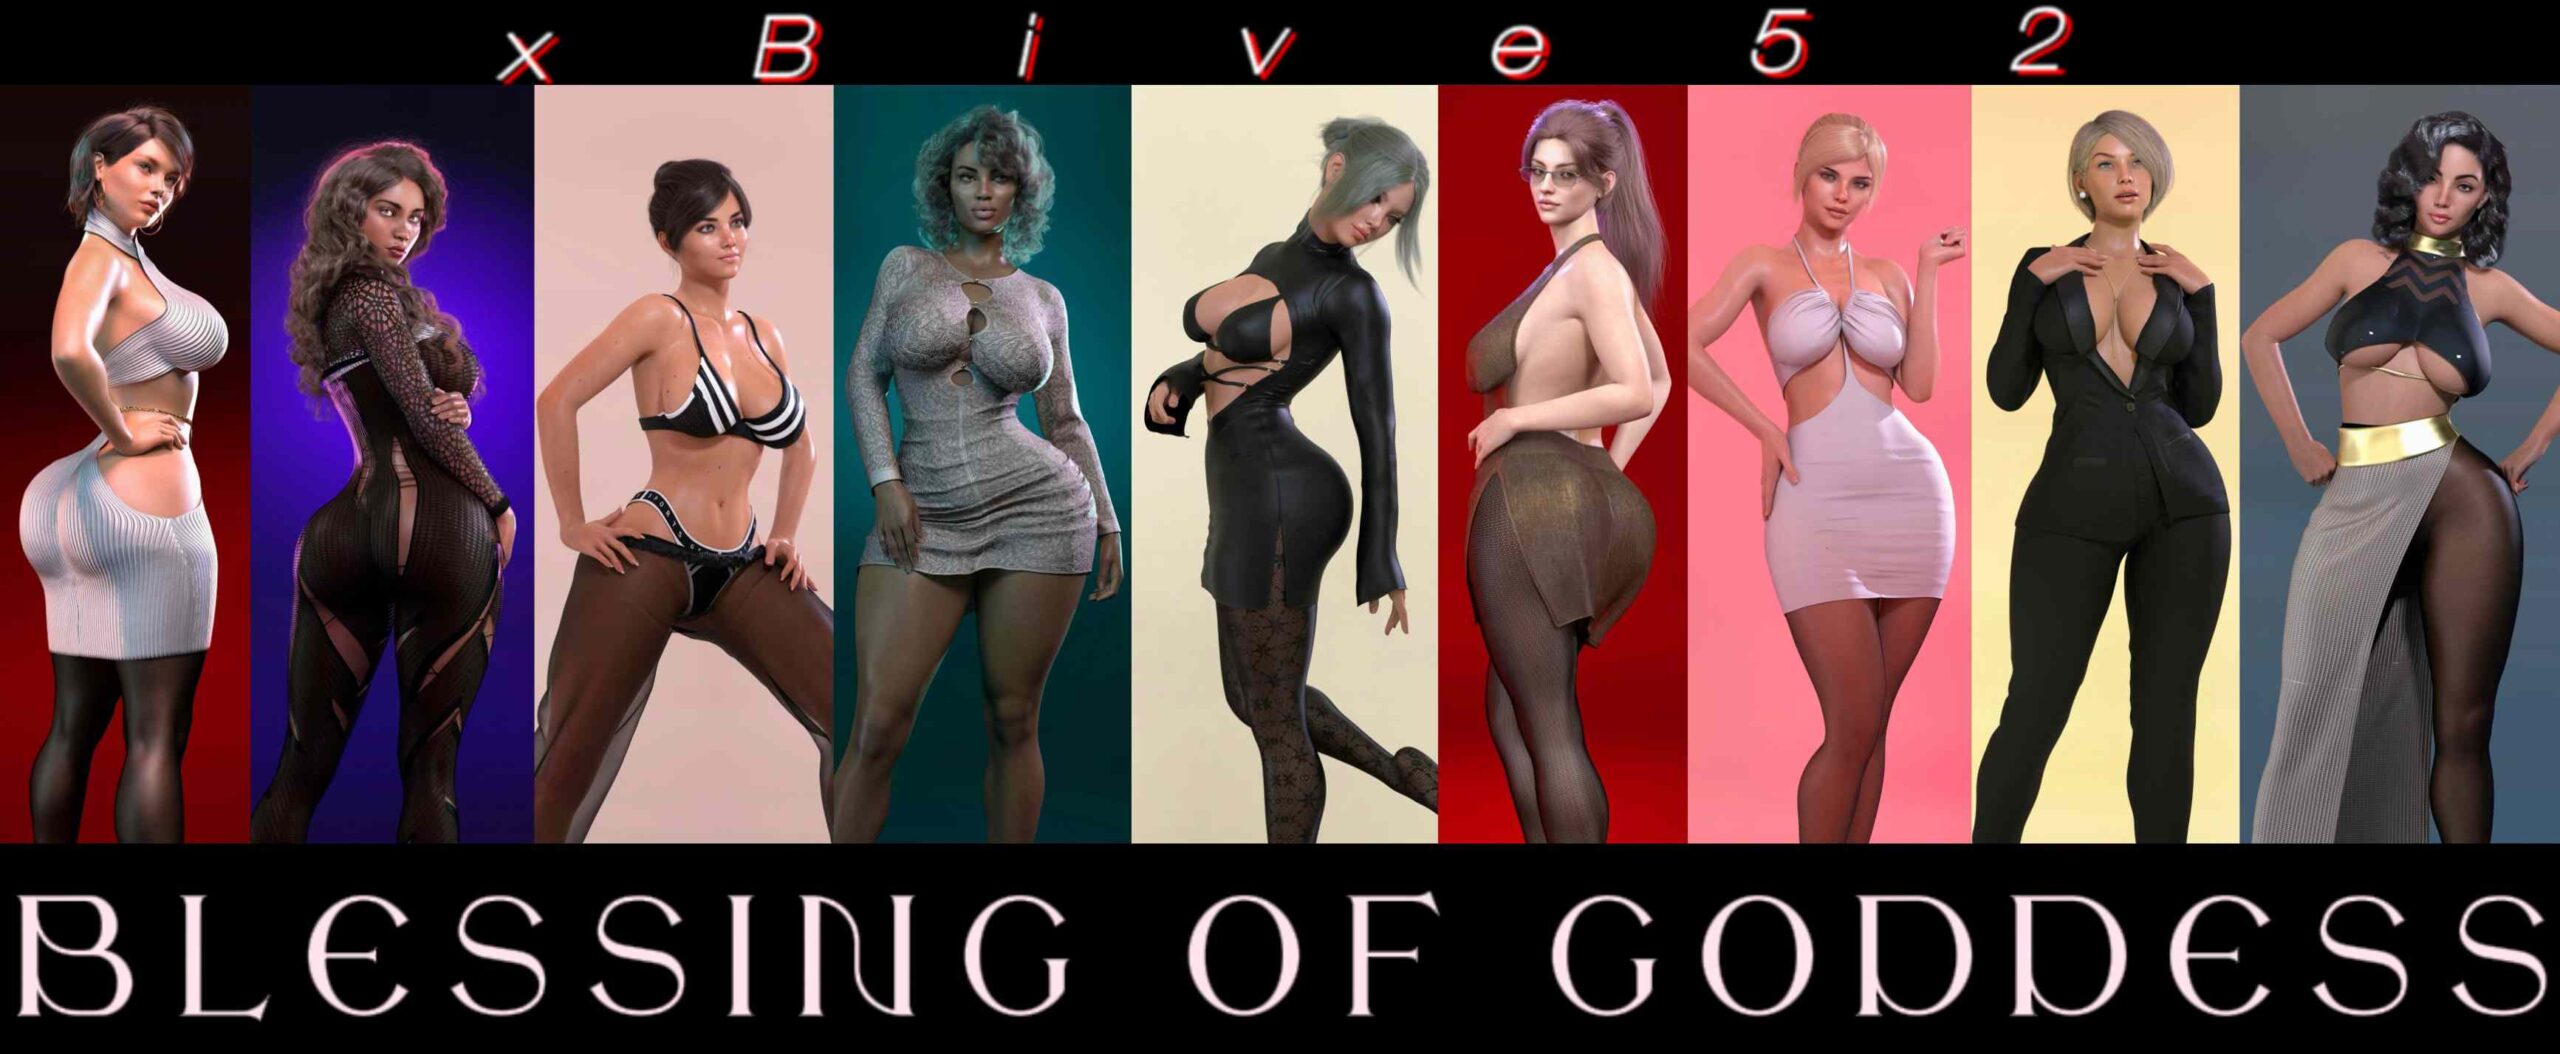 Blessing of Goddess [xBive52] Adult xxx Game Download